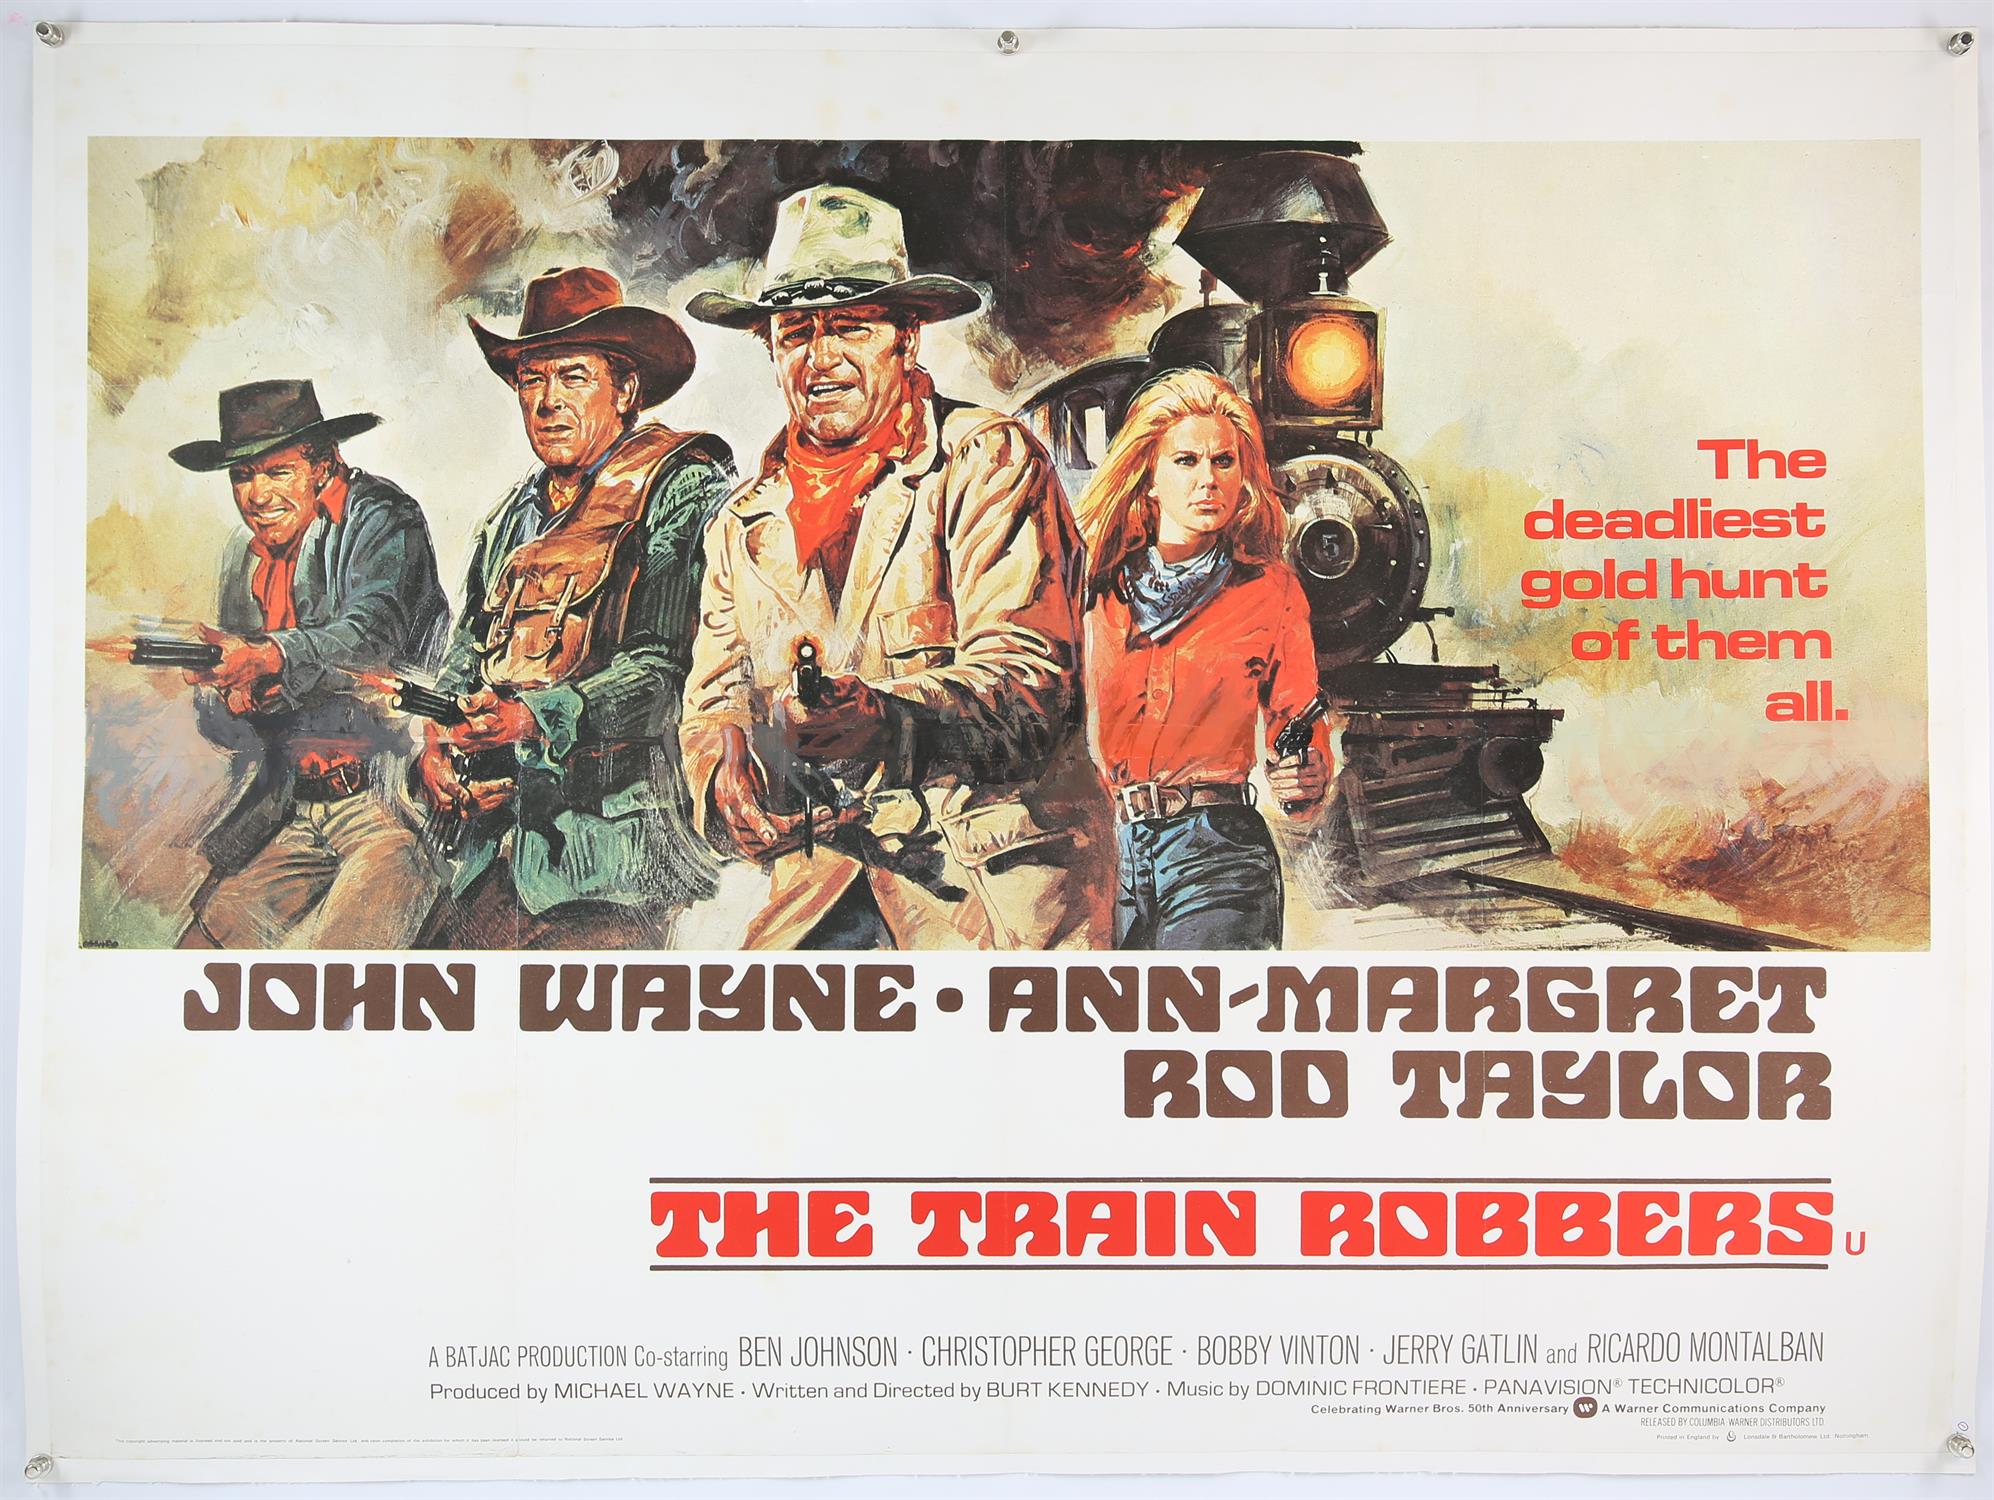 The Train Robbers (1973) UK Quad Poster, for the John Wayne western with poster art by Renato